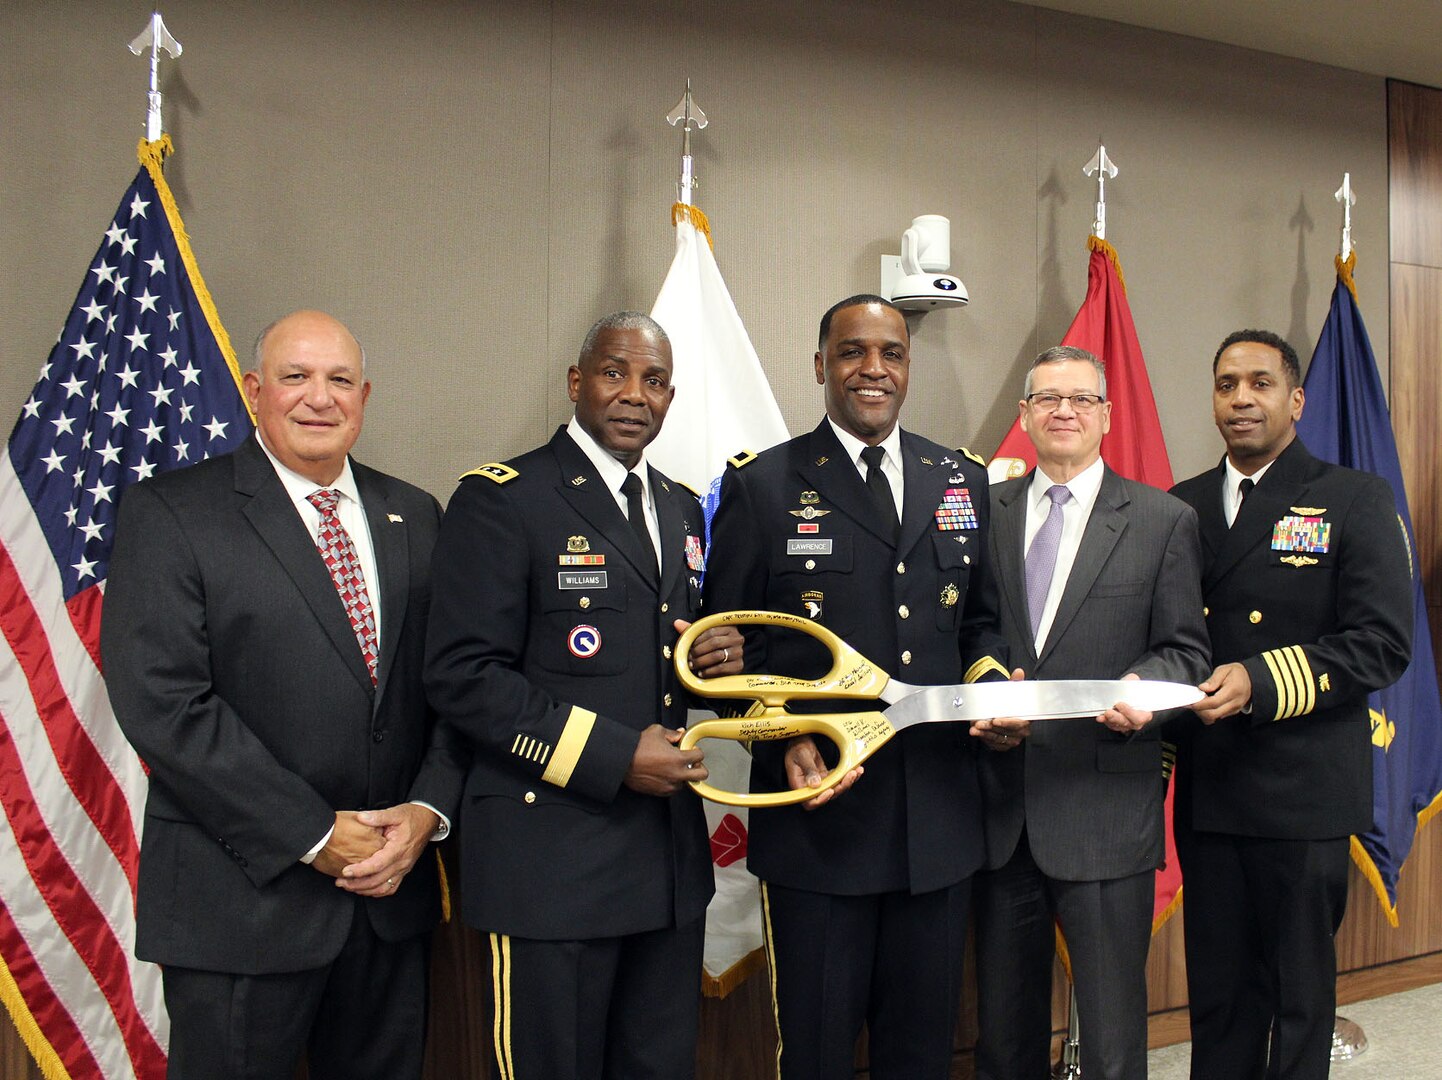 The ceremonial scissors used during the ribbon cutting for Building 45 were signed by (pictured left to right) Yogi Mangual, former Defense Logistics Agency Troop Support commander, Army Lt. Gen. Darrell Williams, director of the Defense Logistics Agency, Army Brig. Gen. Gavin Lawrence, commander of Defense Logistics Agency Troop Support; Richard Ellis, deputy commander of Defense Logistics Agency Troop Support; and Navy Capt. Preston Gill, commanding officer of Naval Support Activity Mechanicsburg. The ceremony was held on Dec. 10, 2019 at the Defense Logistics Agency Troop Support headquarters in Philadelphia. (Photo by Nancy Benecki)